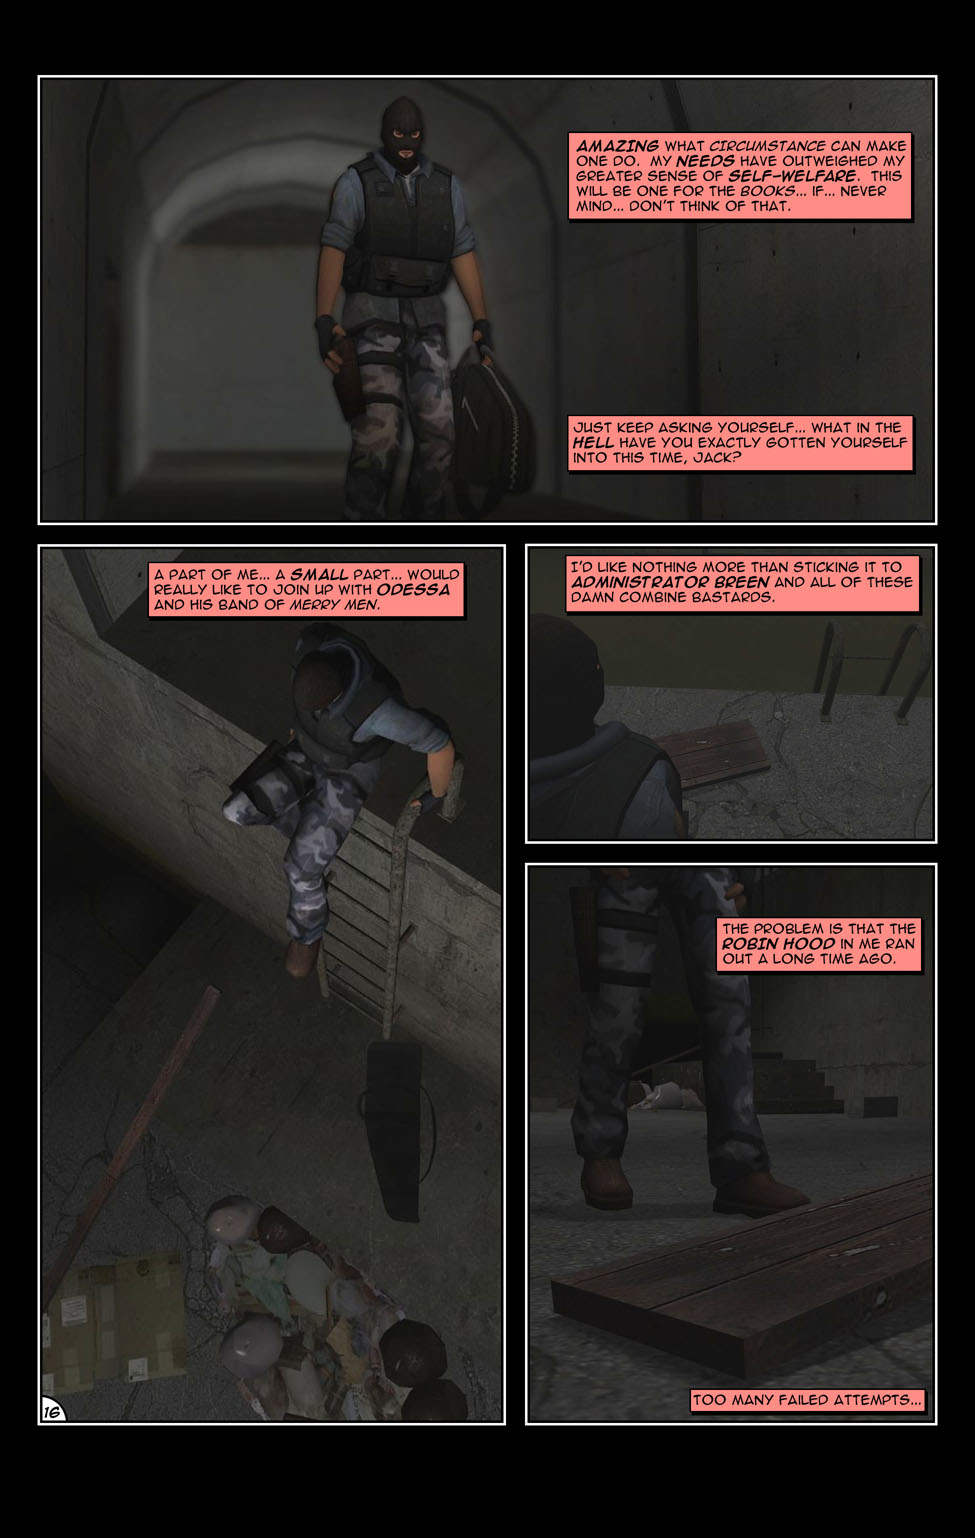 As he trudges through miles of sewers, Jack can't help but be amazed at what circumstances can make one do, as the survivalist finds himself risking his neck out for supplies. A part of him would really like to join Odessa and his rebels and stick it to Administrator Breen, but he realizes he's long given up on fighting back.